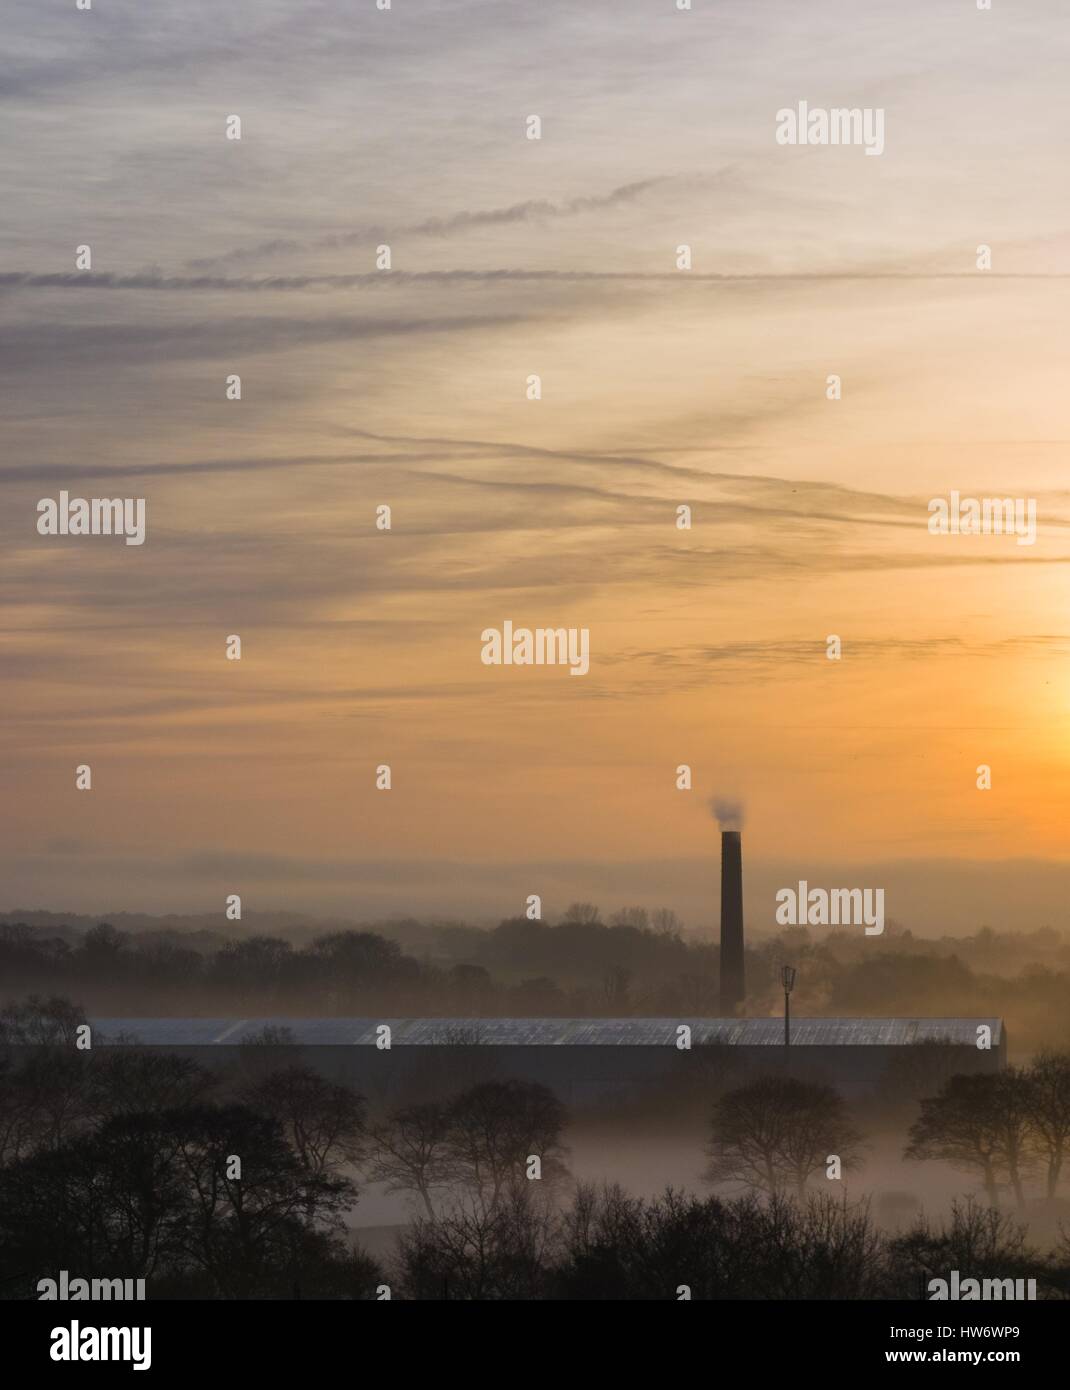 Factory chimney stack emerging from misty countryside at sunset Stock Photo